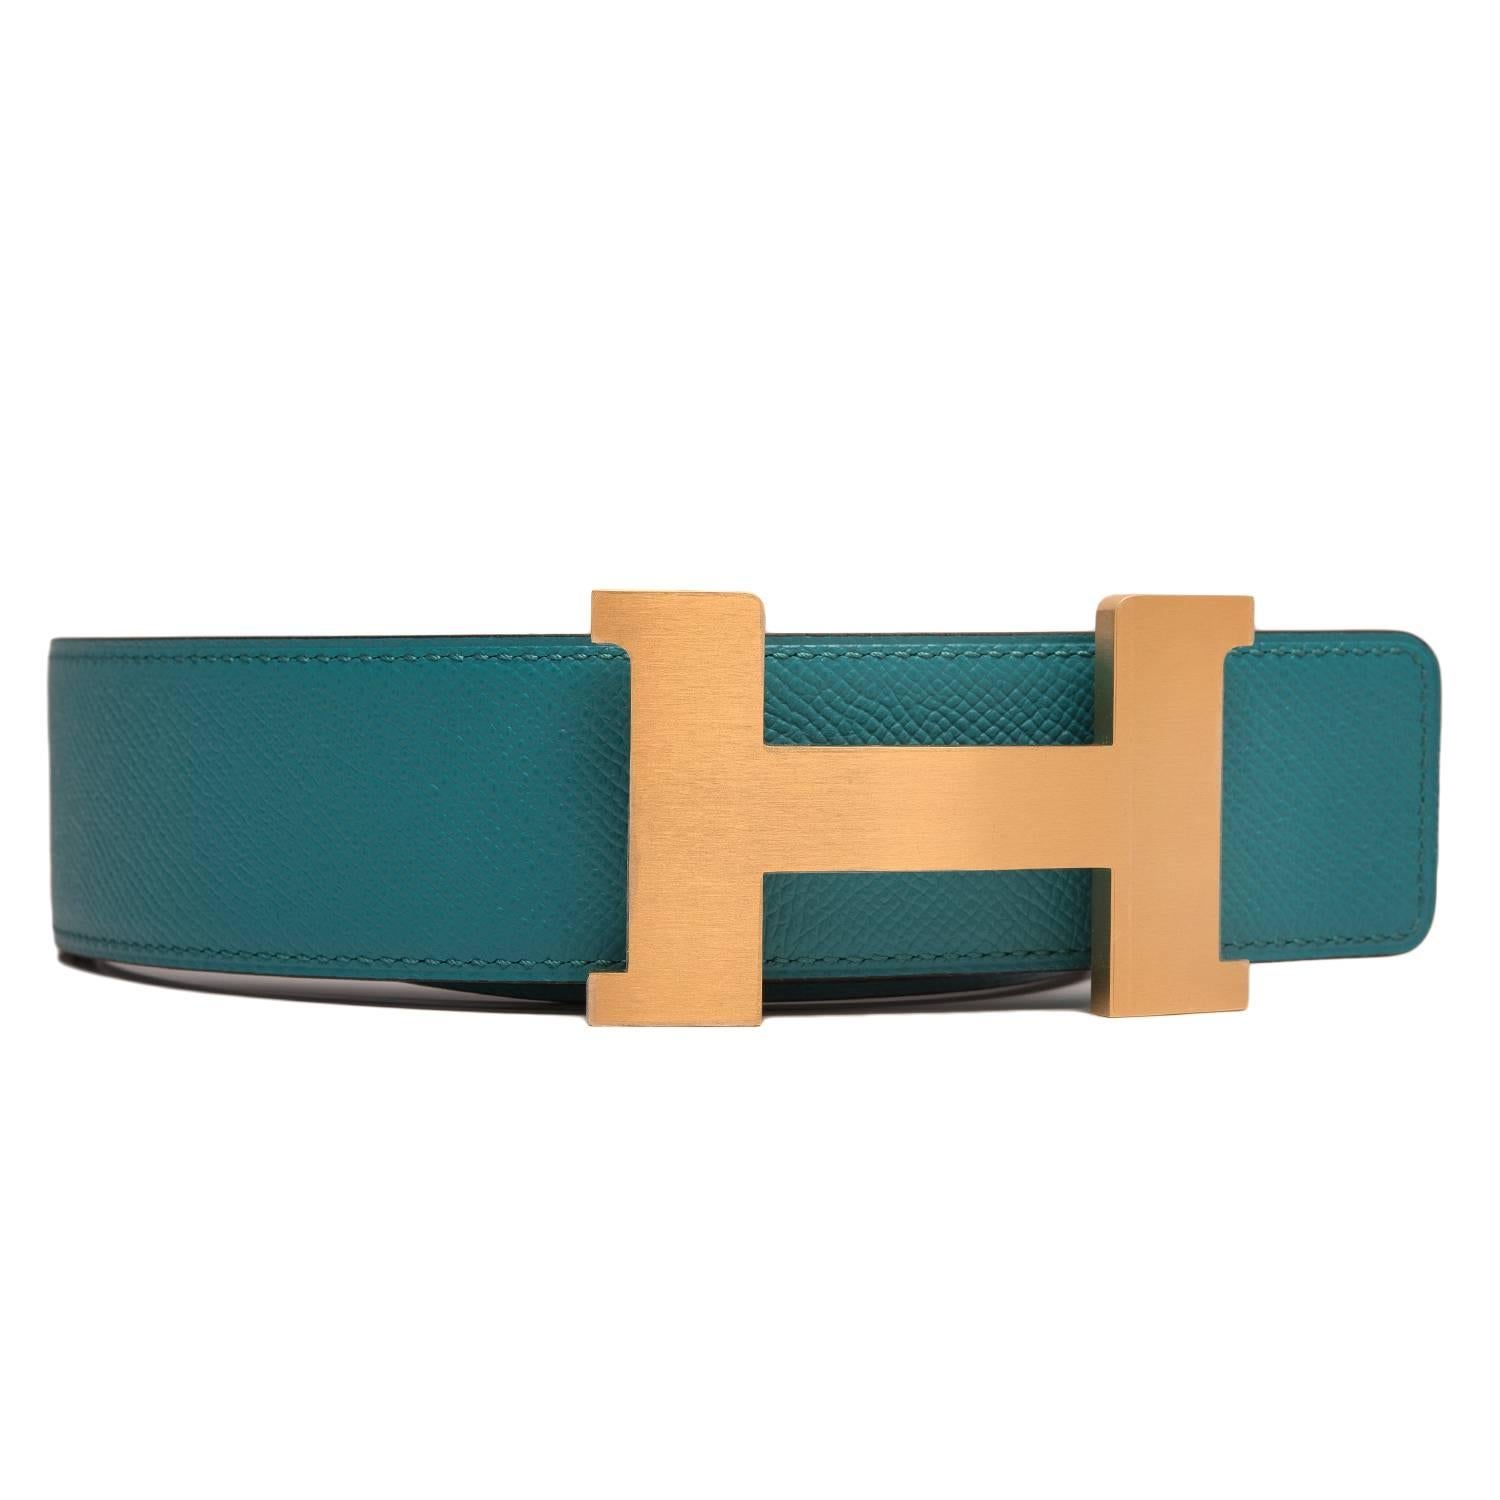 Hermes belt kit comprising an adjustable wide 42mm Constance H belt of Blue Indigo epsom with tonal stitching reversing to Blue Paon epsom with tonal stitching accompanied by a removable brushed gold H buckle.

Origin: France

Condition: